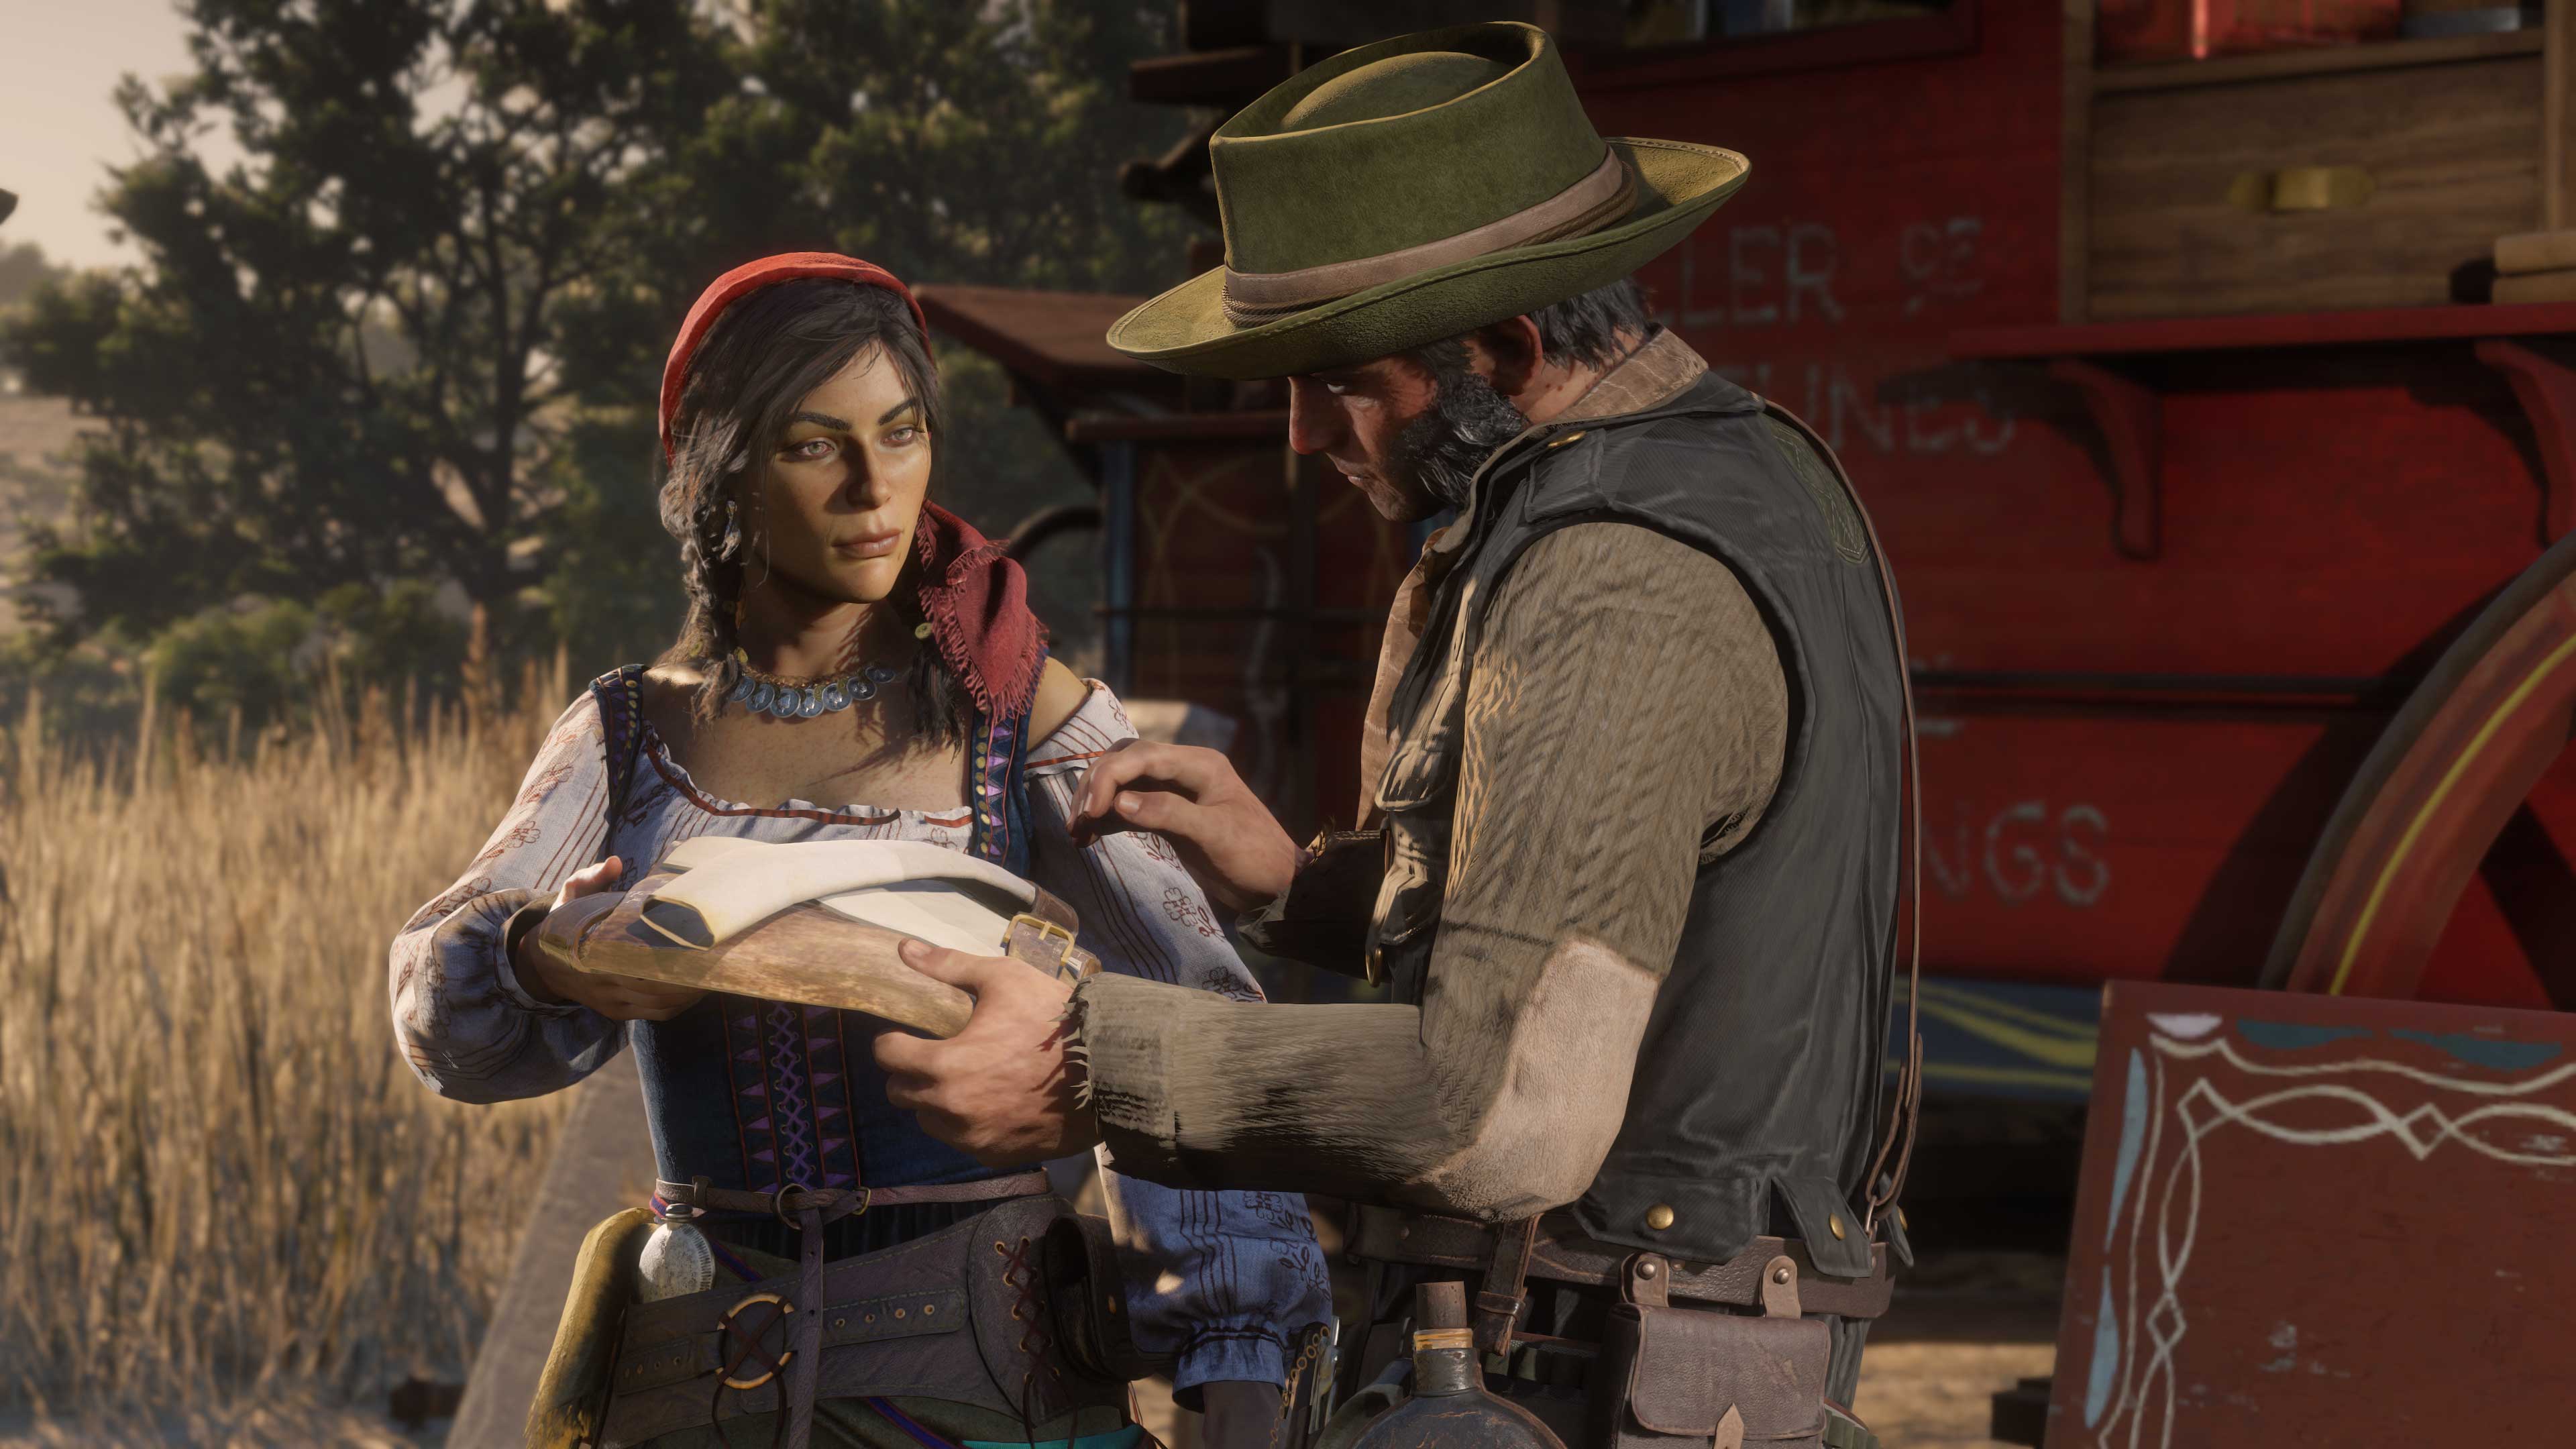 Uncover in Red Dead Online to Reap Collector Bonuses and Rewards - Rockstar